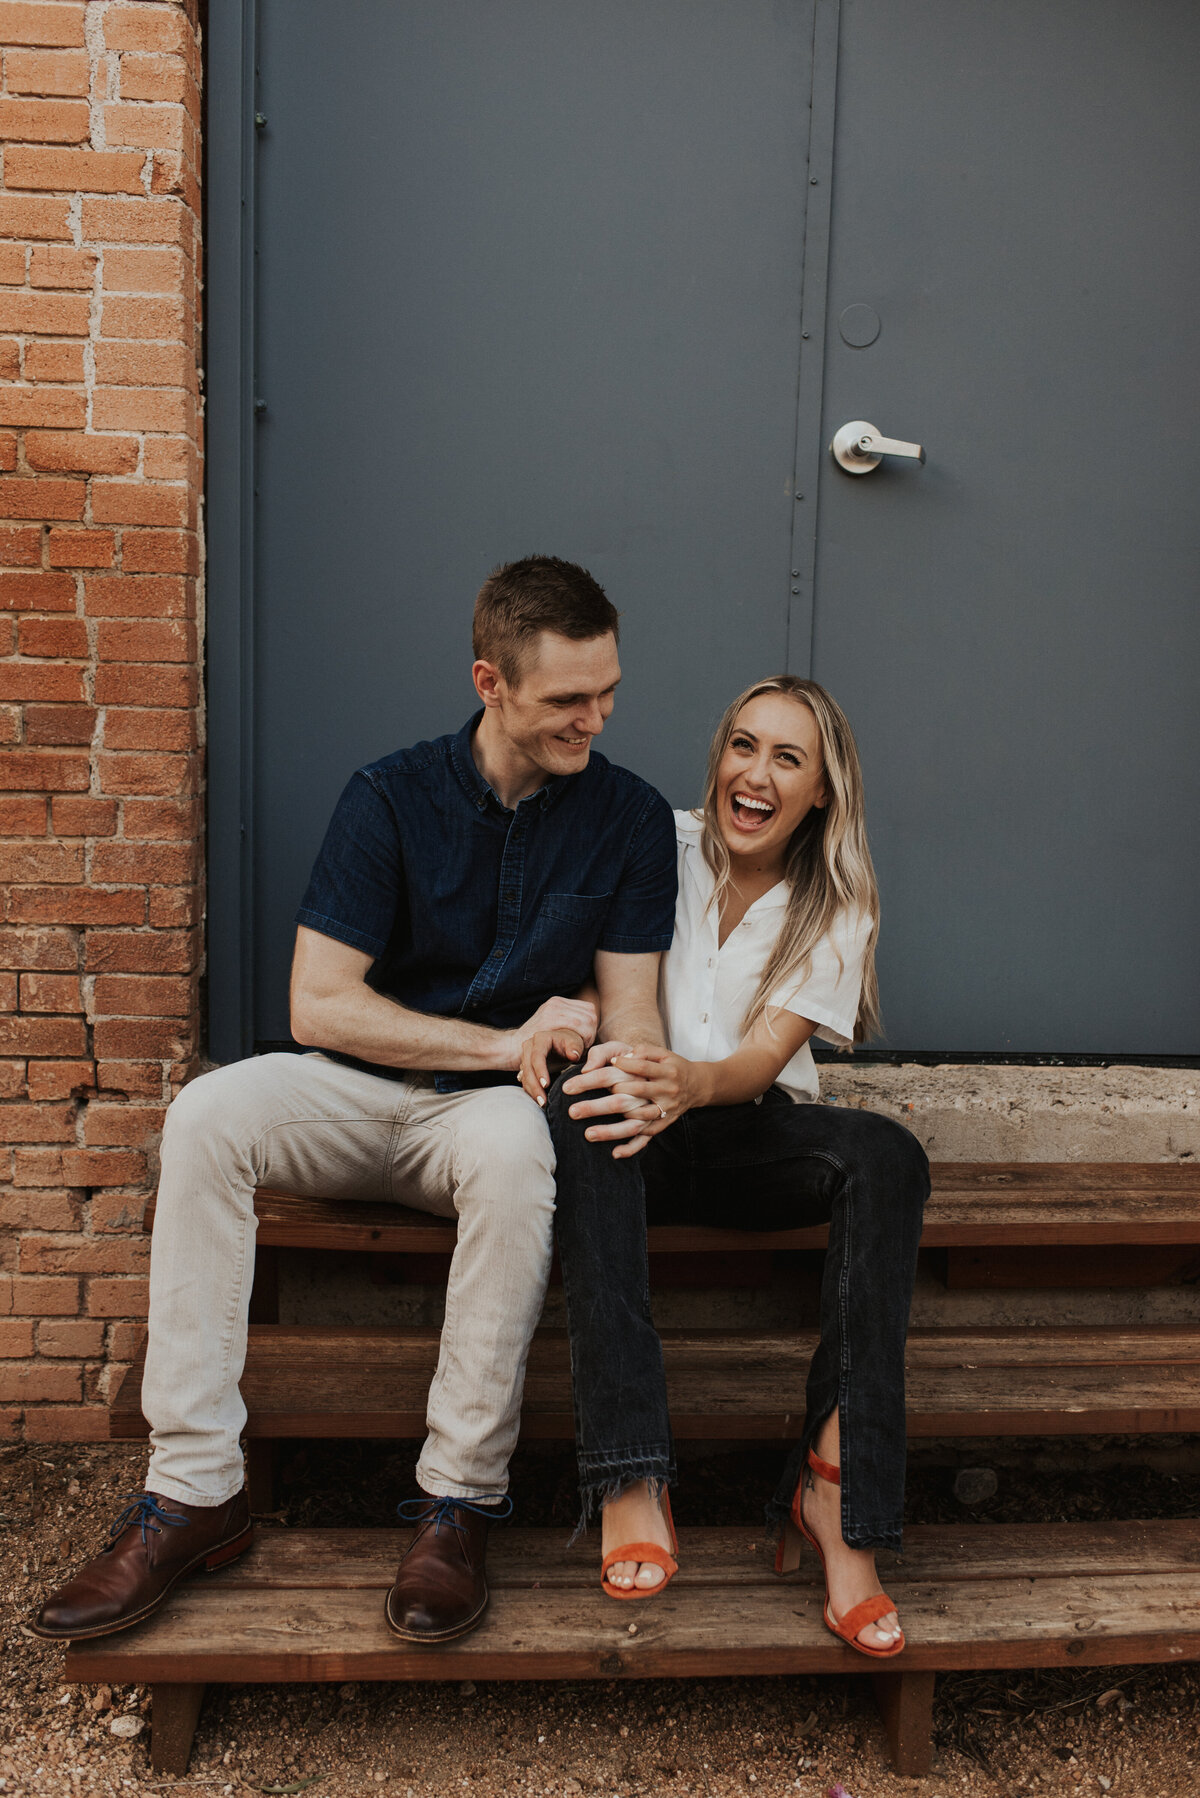 Sharon-and-Kerry-engagement-session-at-bishop-arts-dallas-16